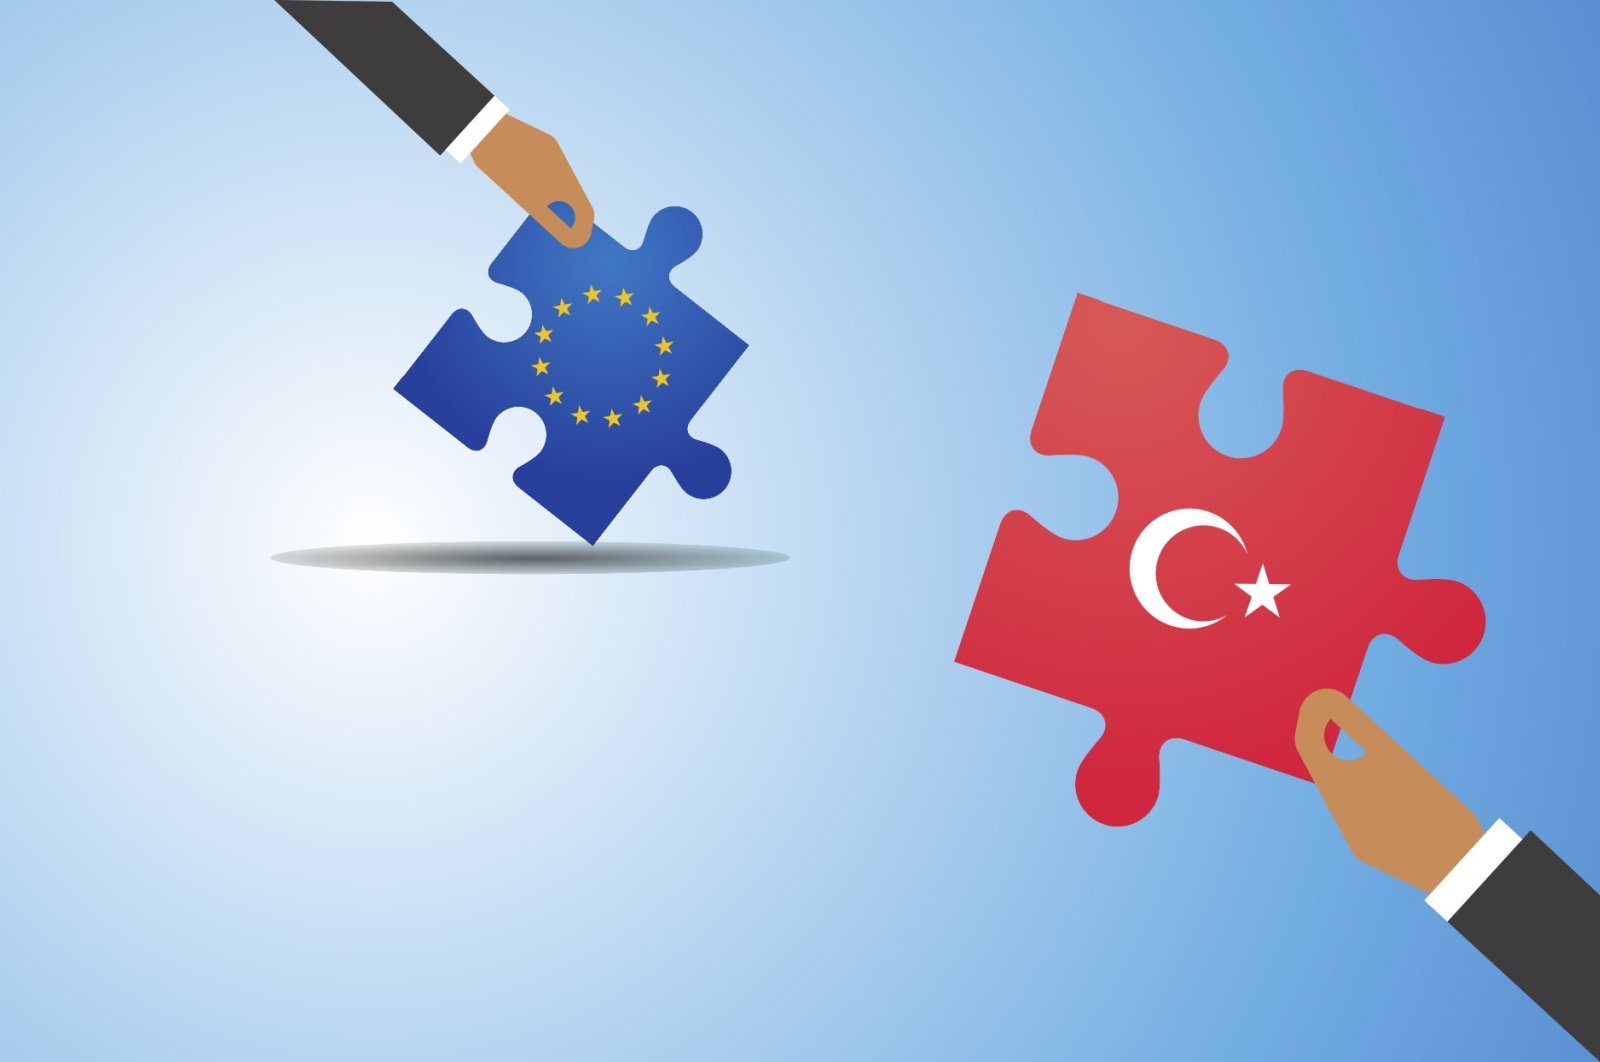 Energy cooperation between European Union (EU) and Türkiye can extend beyond the diversification of gas import lines. (Shutterstock Photo)